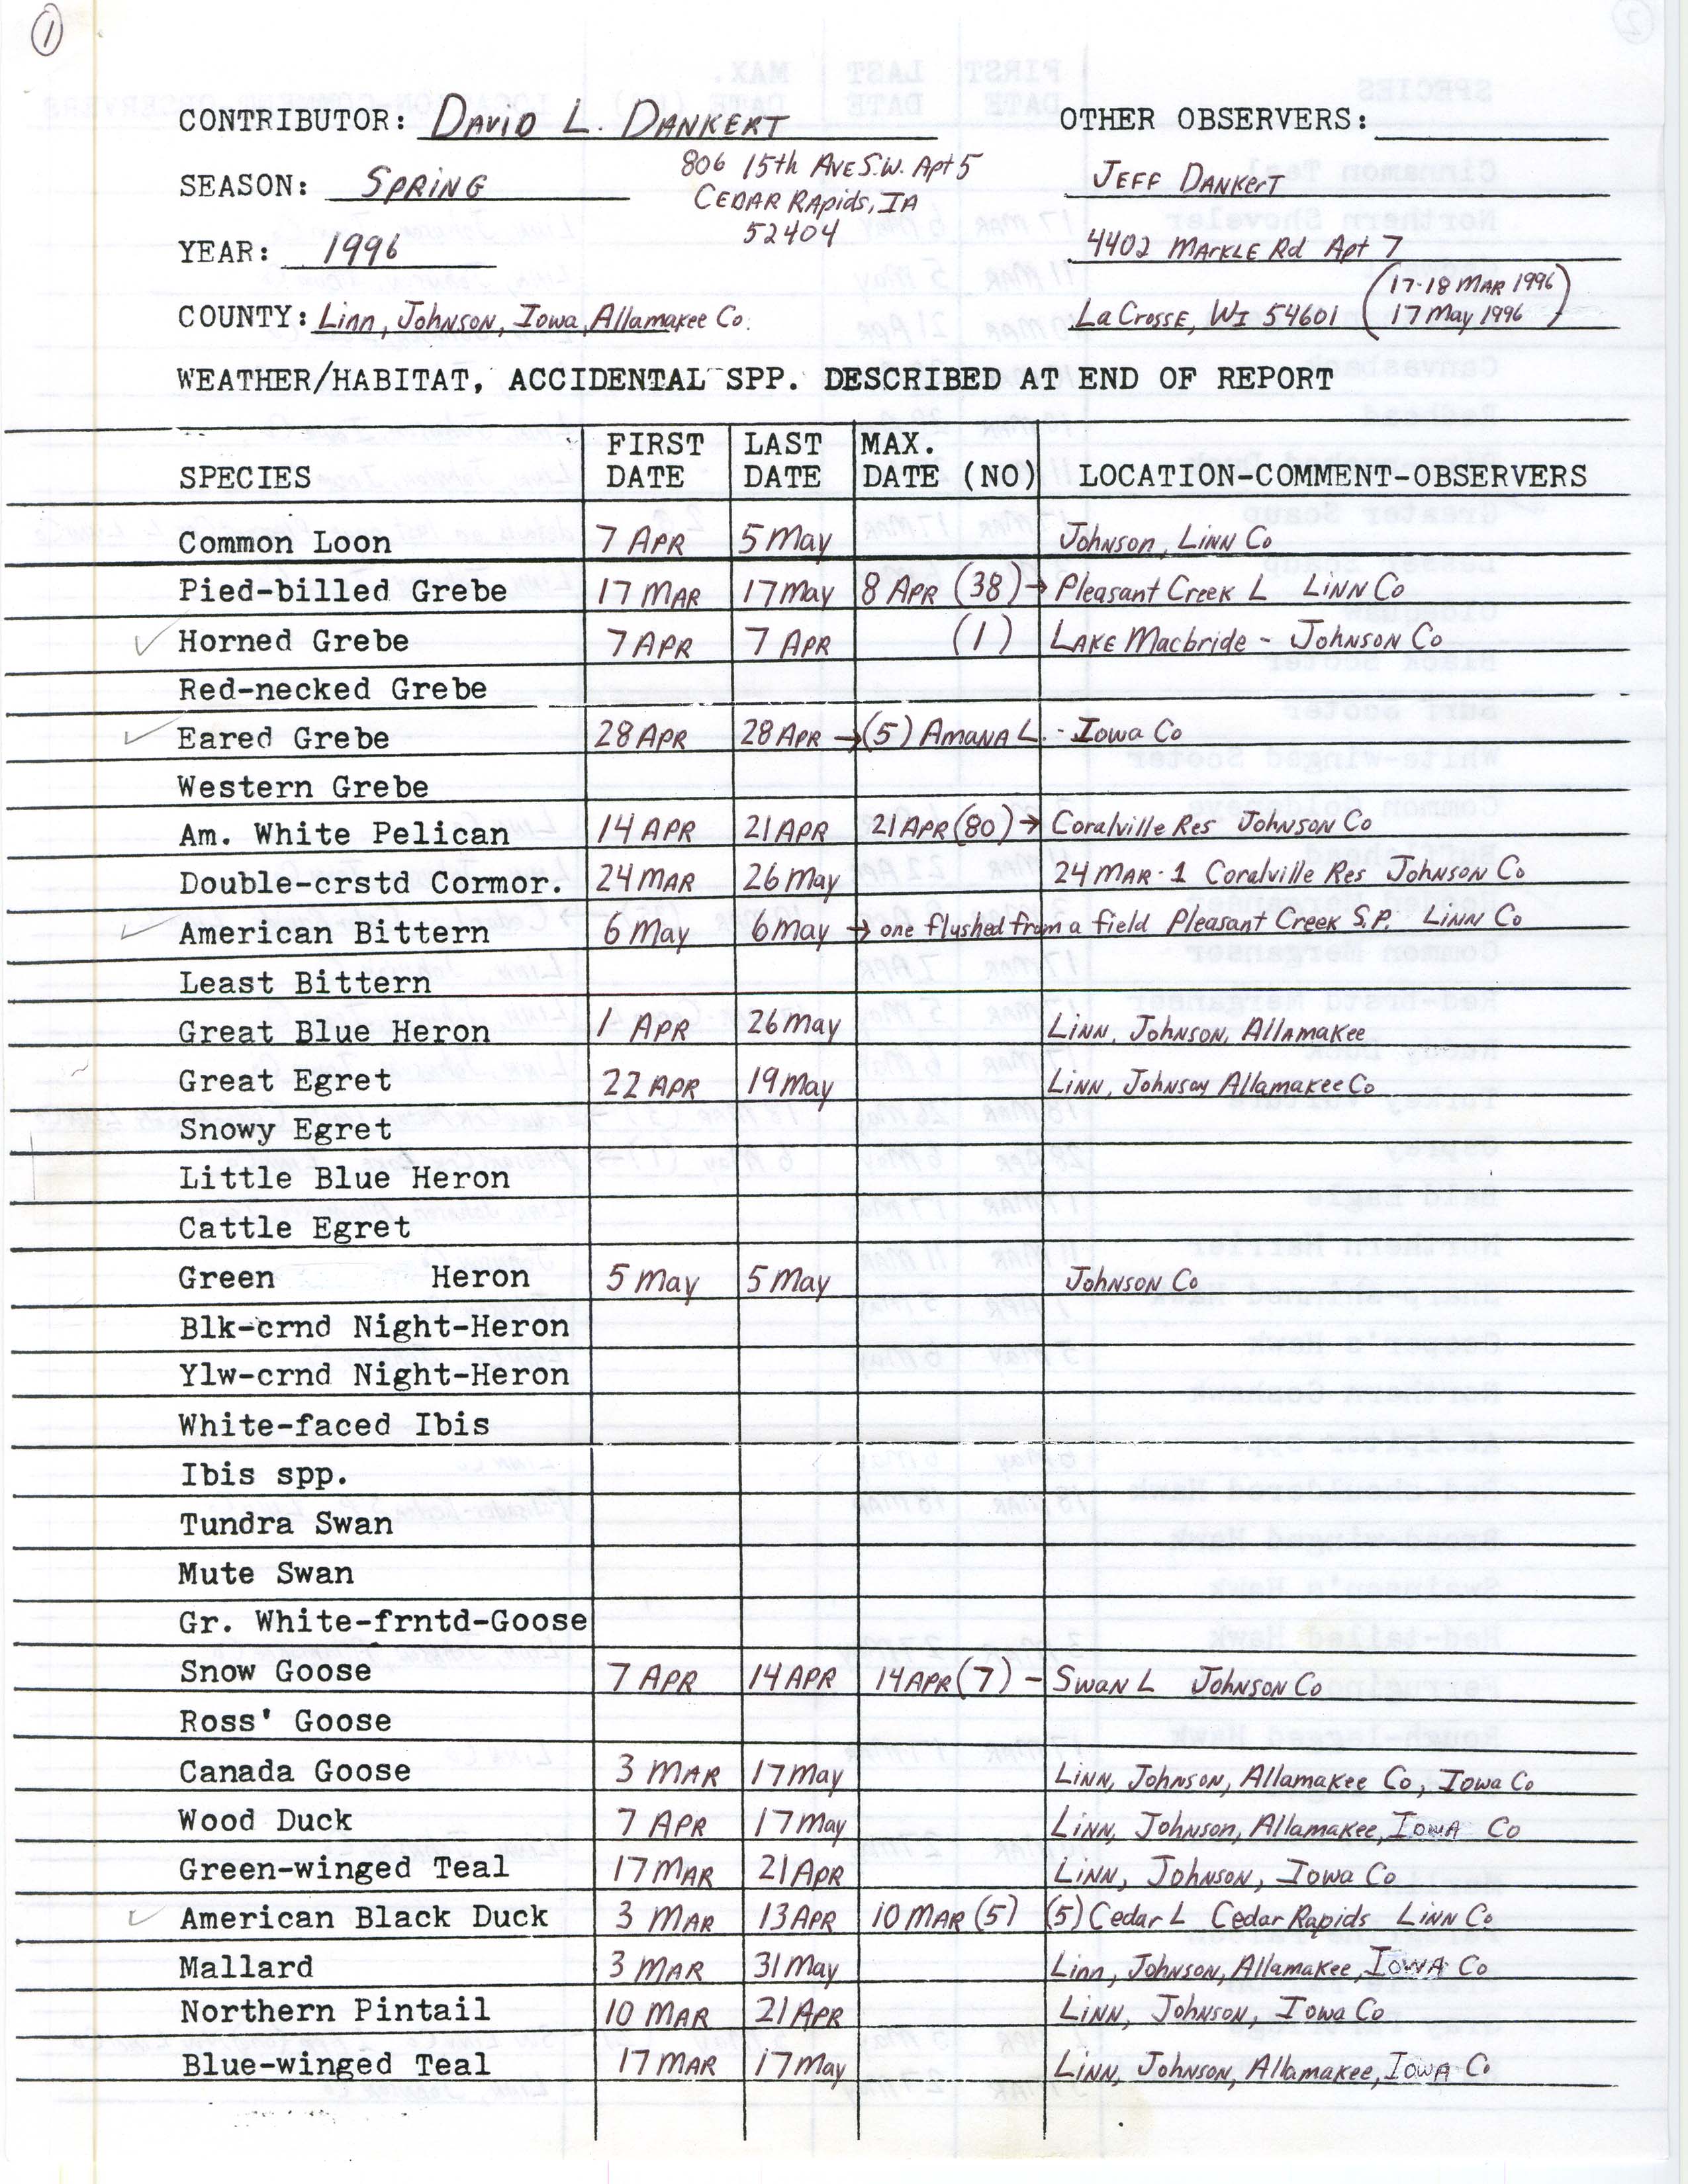 Field notes contributed by David L. Dankert, spring 1996